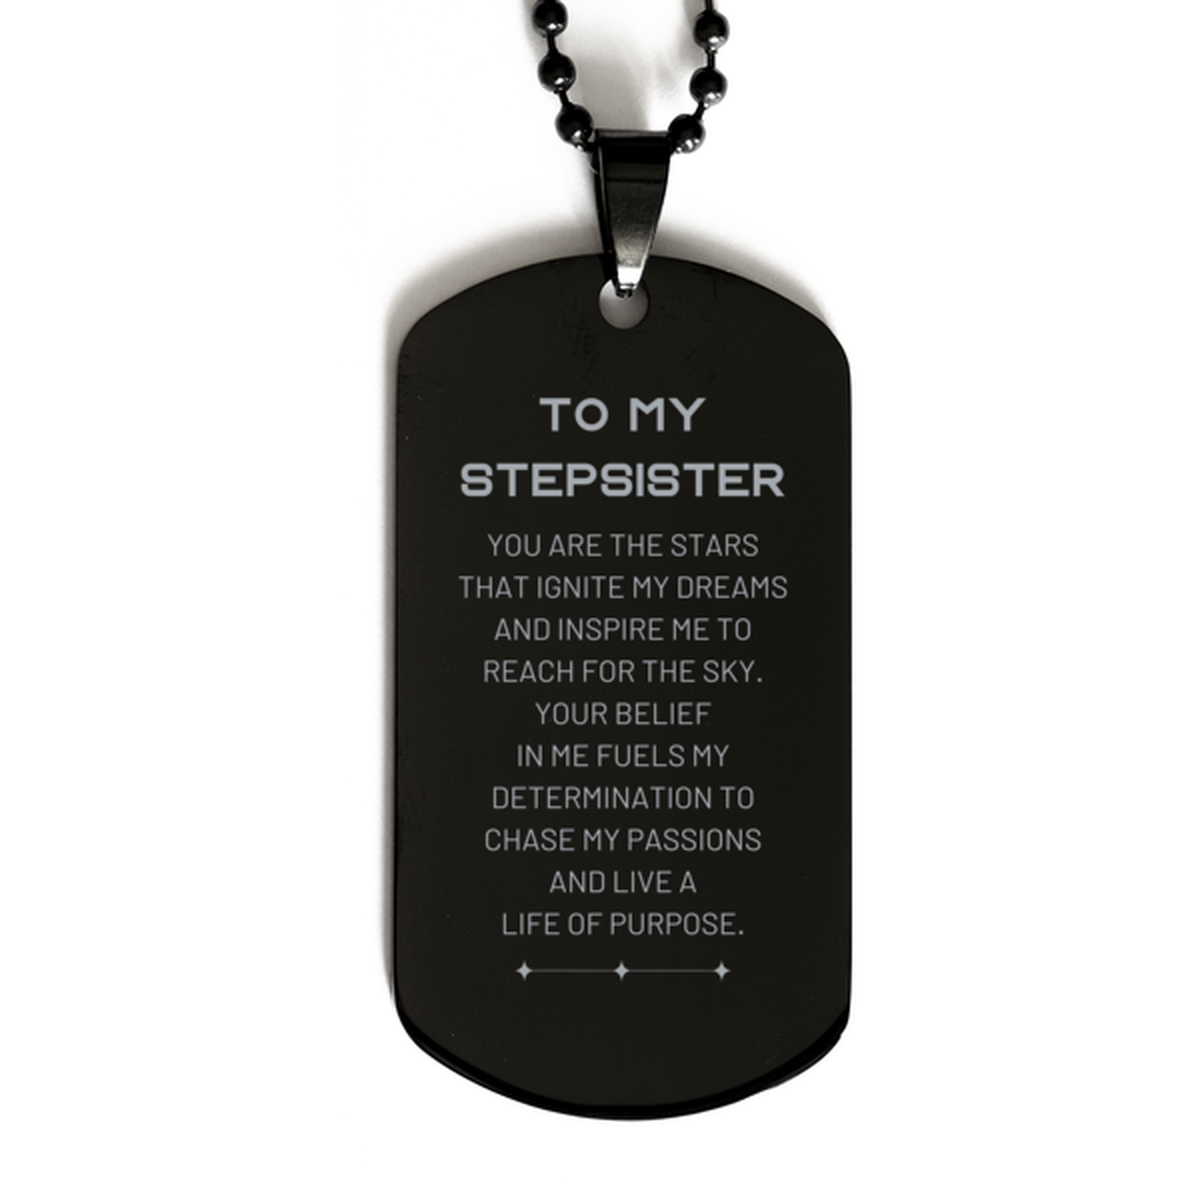 To My Stepsister Black Dog Tag, You are the stars that ignite my dreams and inspire me to reach for the sky, Birthday Unique Gifts For Stepsister, Thank You Gifts For Stepsister